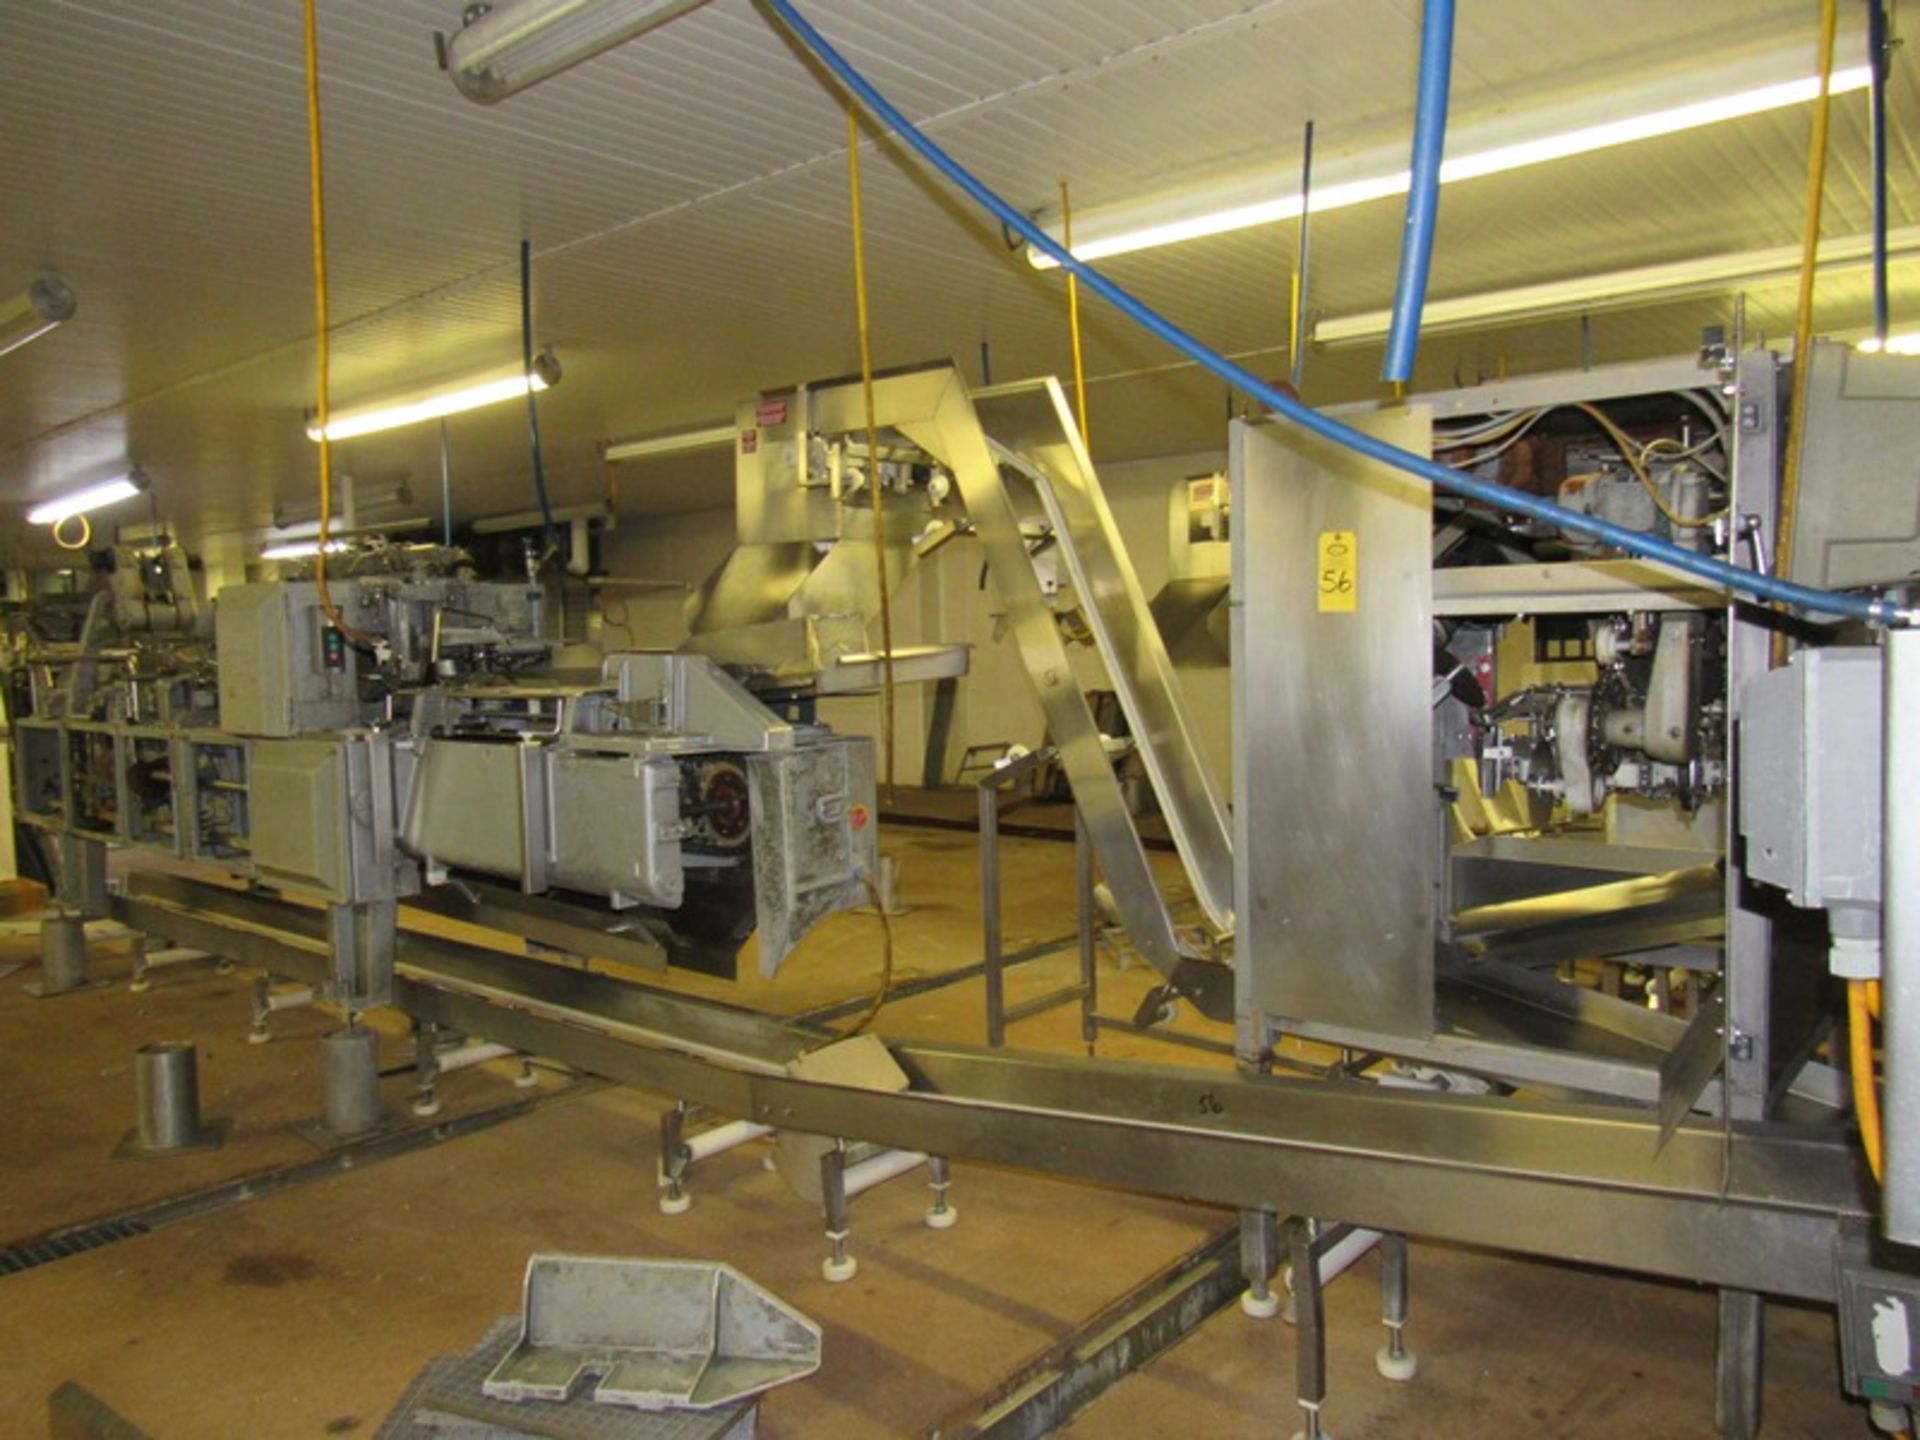 Lot Stainless Steel Automatic Heading Machine, 8 stations, stainless steel "Z" conveyor, 18" W X